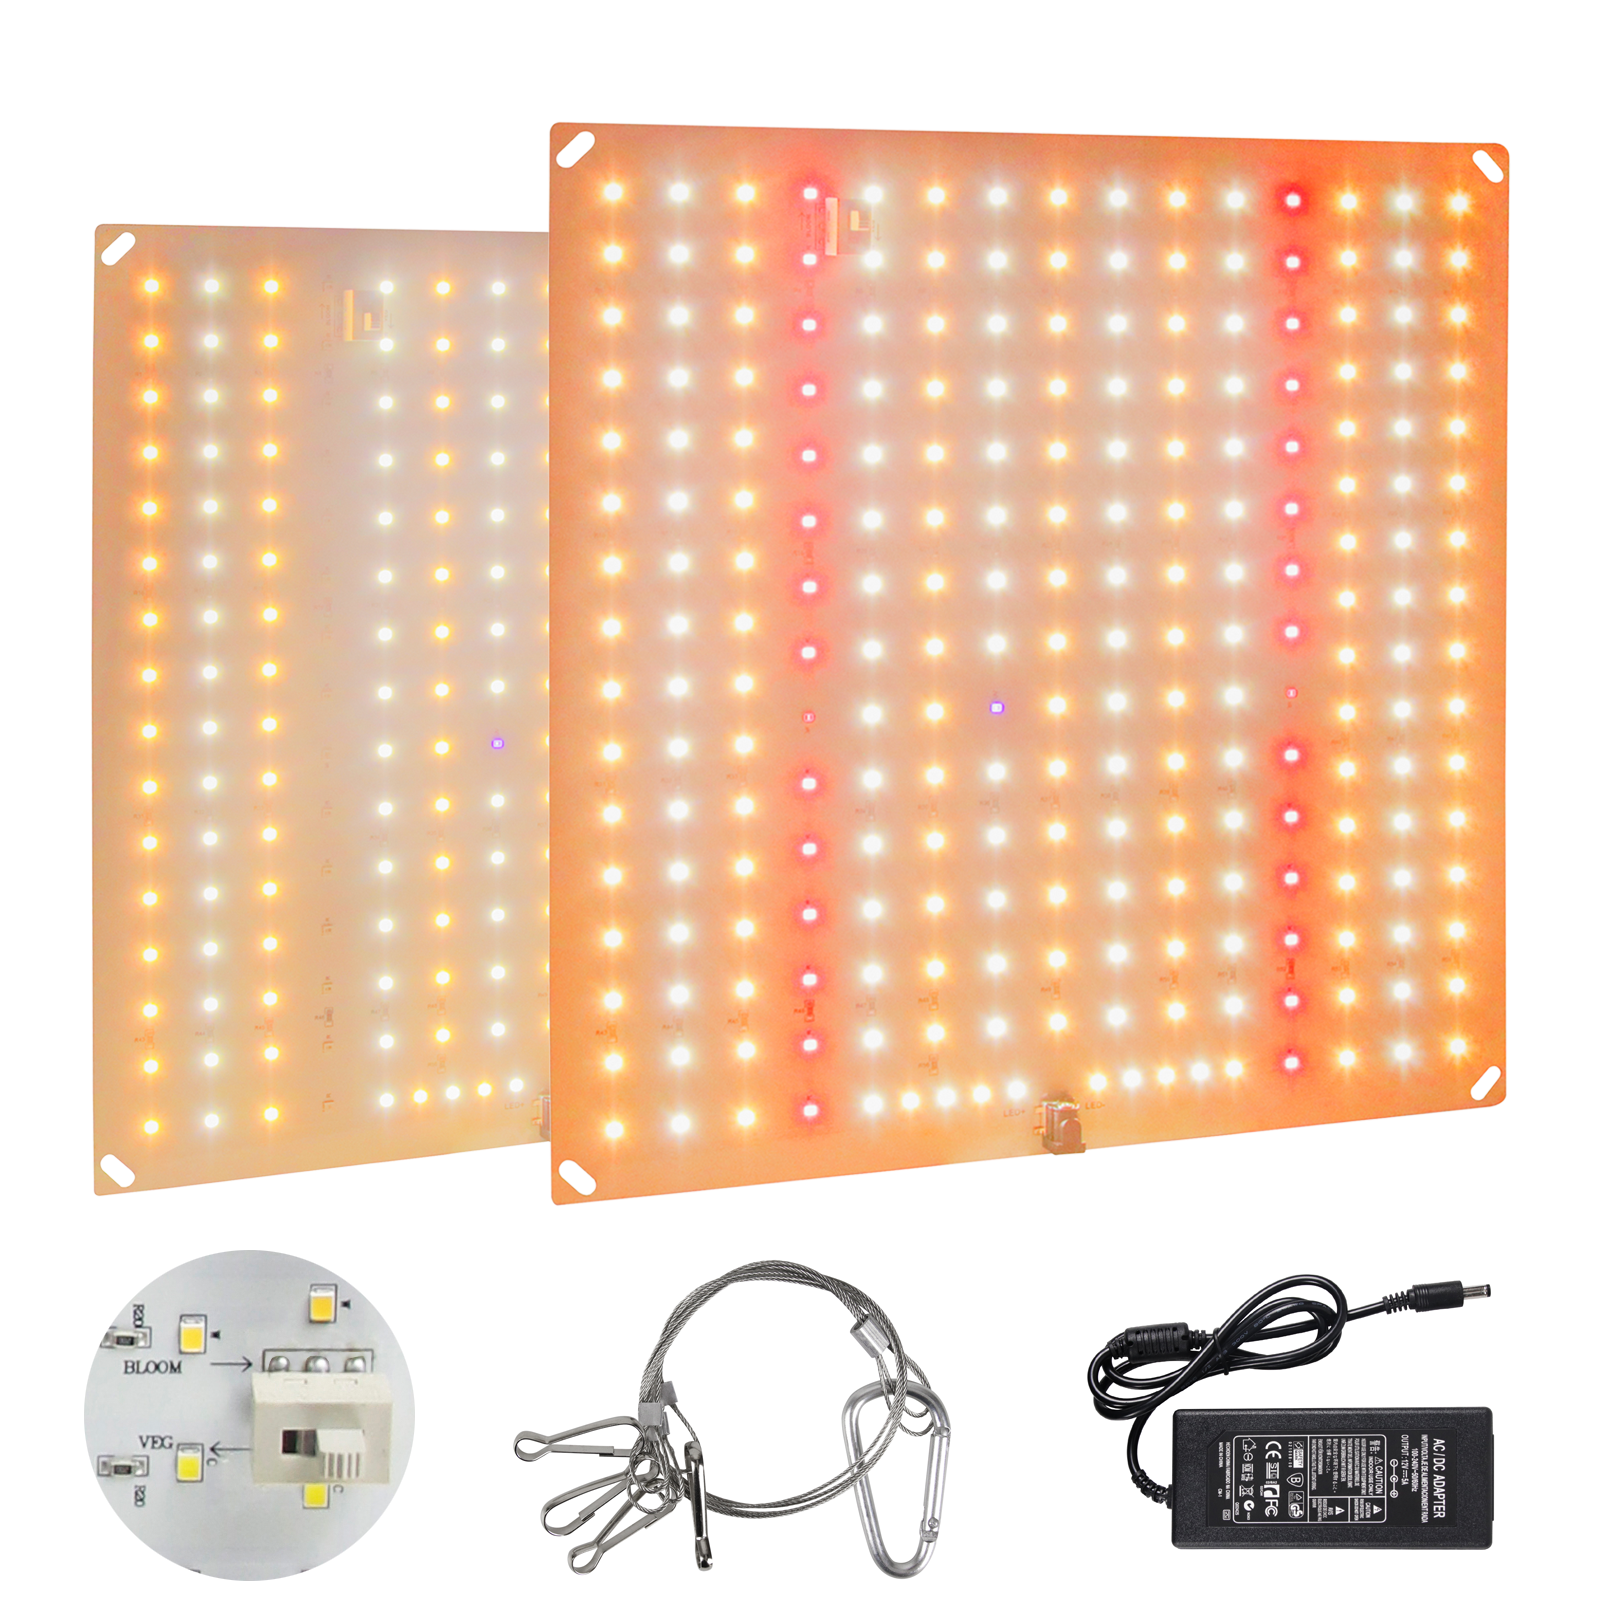 led-grow-light-for-indoor-plants-full-spectrum-grow-tent with cash back rebate